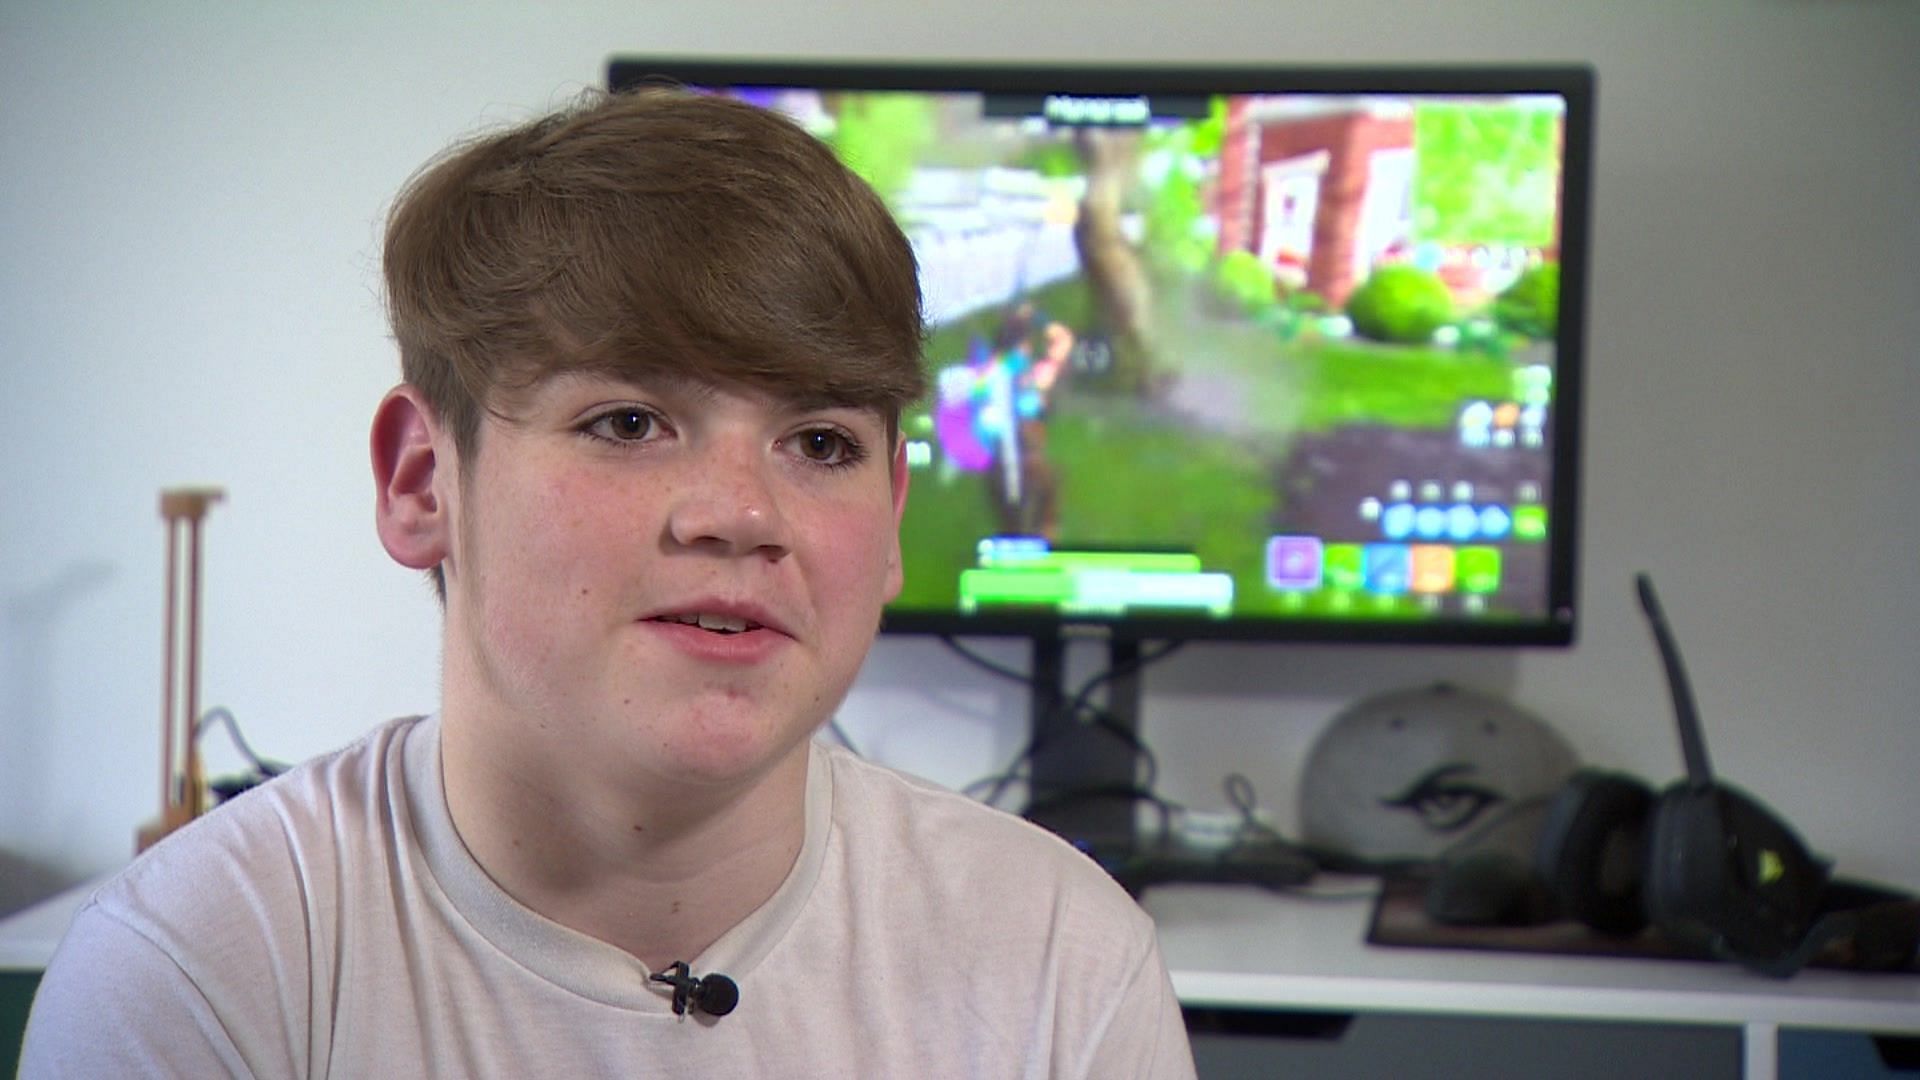 "I'm still wasting time on the game" Fortnite pro Mongraal reportedly